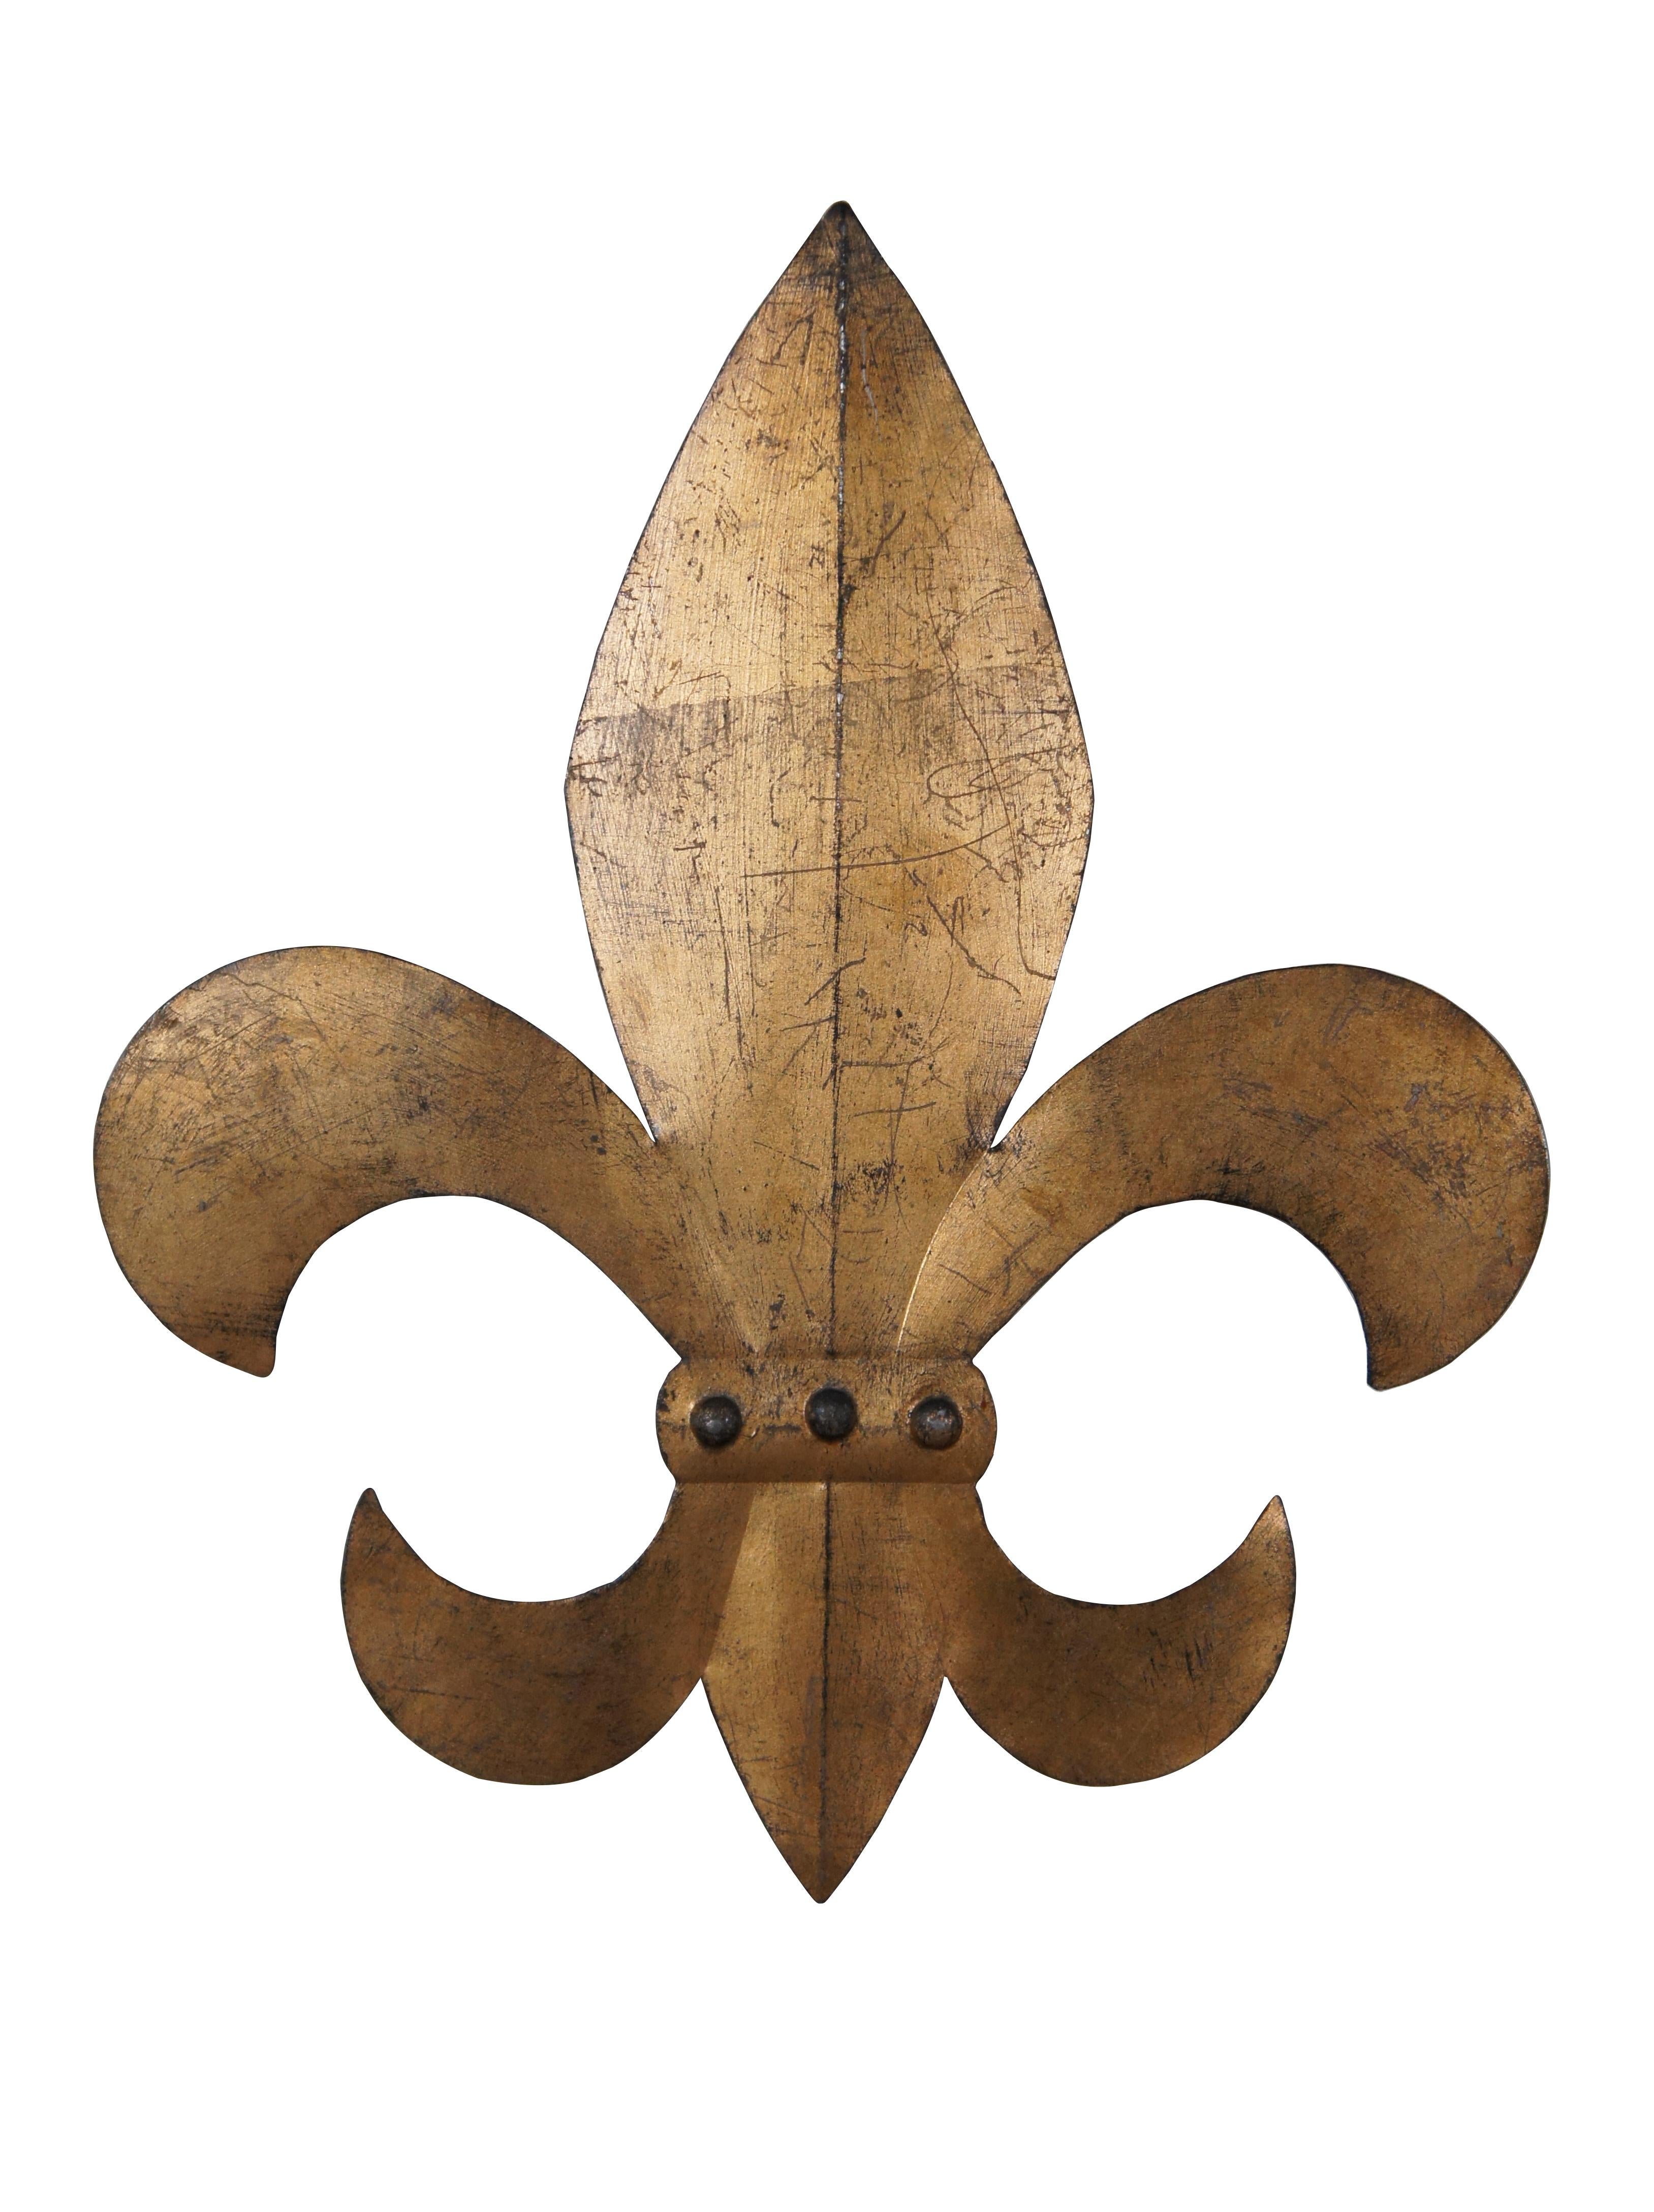 Vintage pair of gold painted Fleur De Lis wall art plaques.  The fleur-de-lis, also spelled fleur-de-lys, is a common heraldic charge in the shape of a lily. Most notably, the fleur-de-lis is depicted on the traditional coat of arms of France that